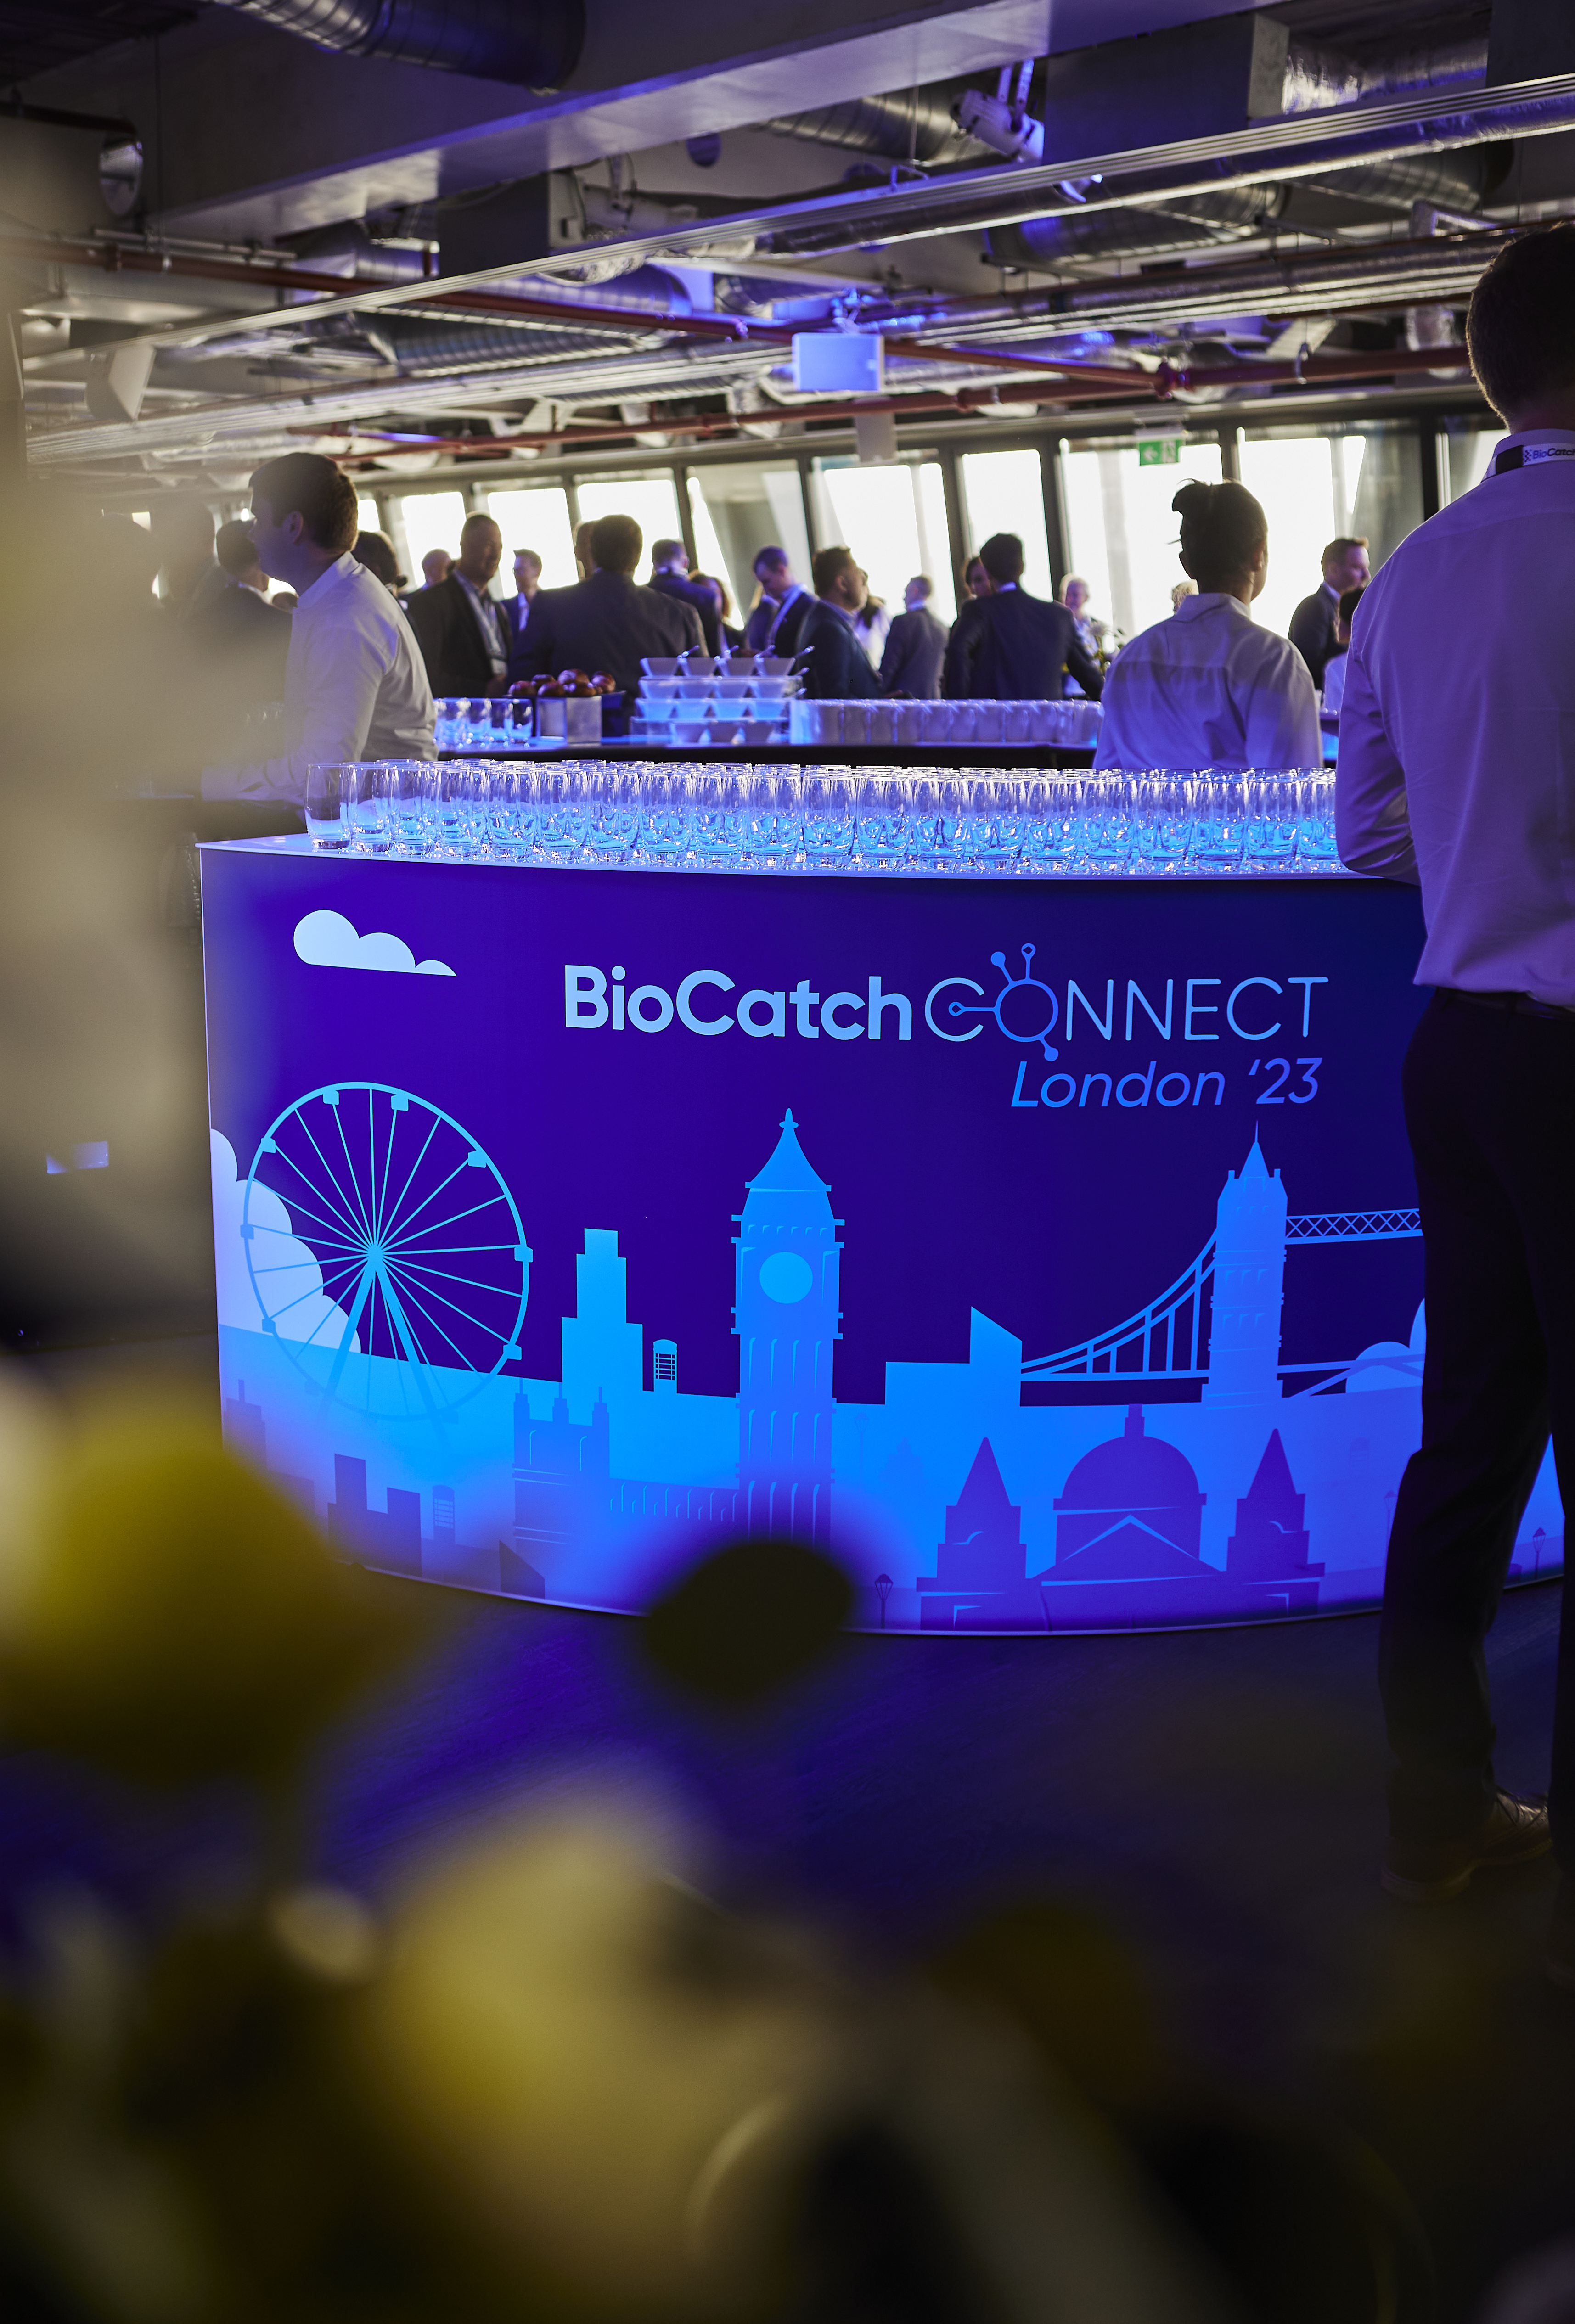 BioCatch Connect London: Discussing Our Opportunity, Capability and Duty to Stop Scams at Scale featured image